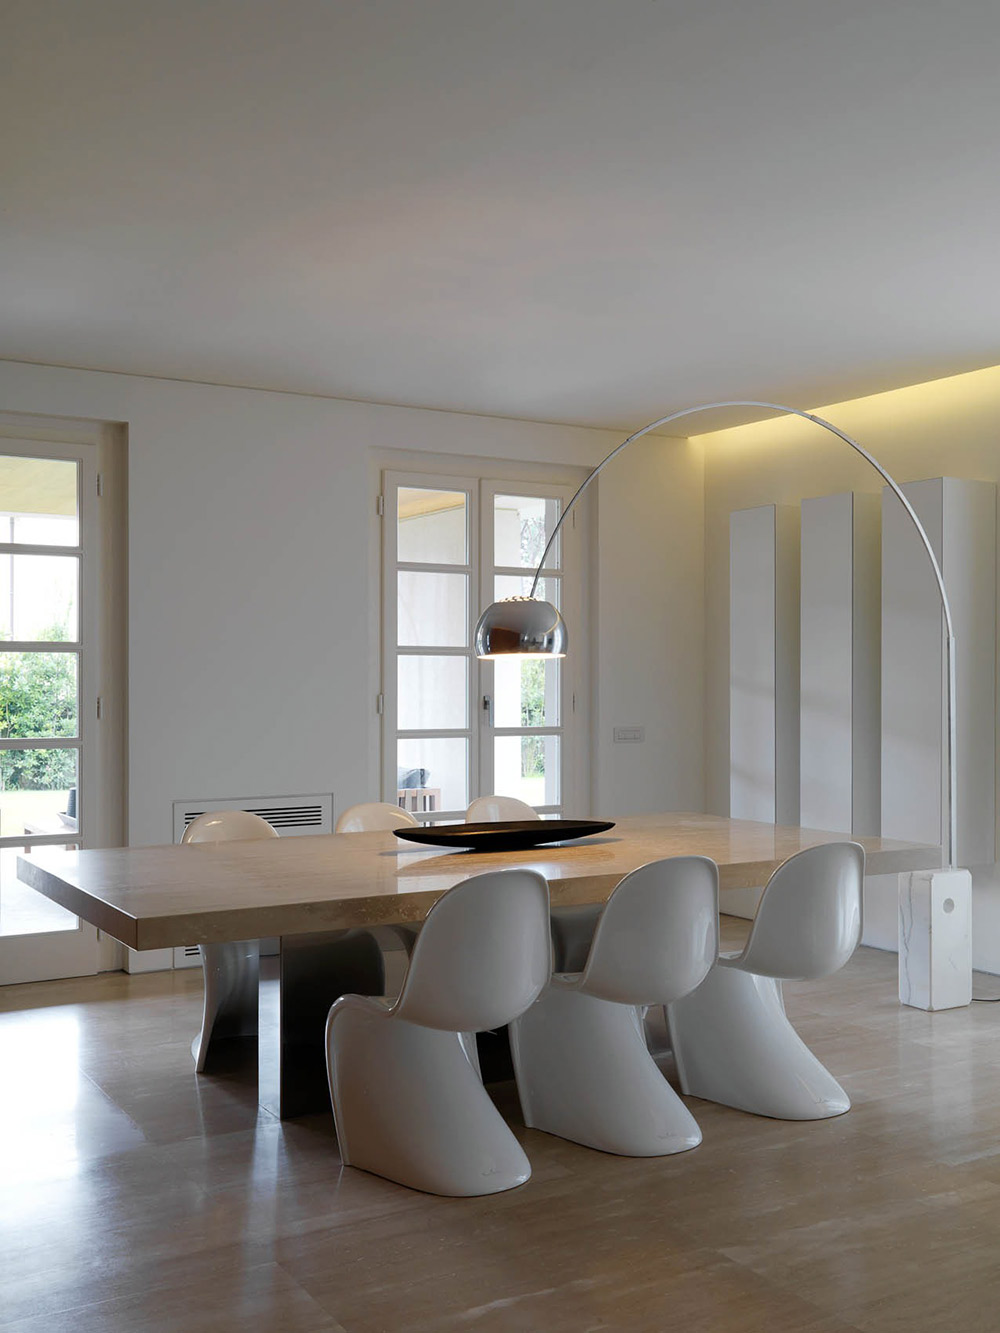 Marble Dining Table, Minimalist Interior in Tuscany, Italy by Victor Vasilev